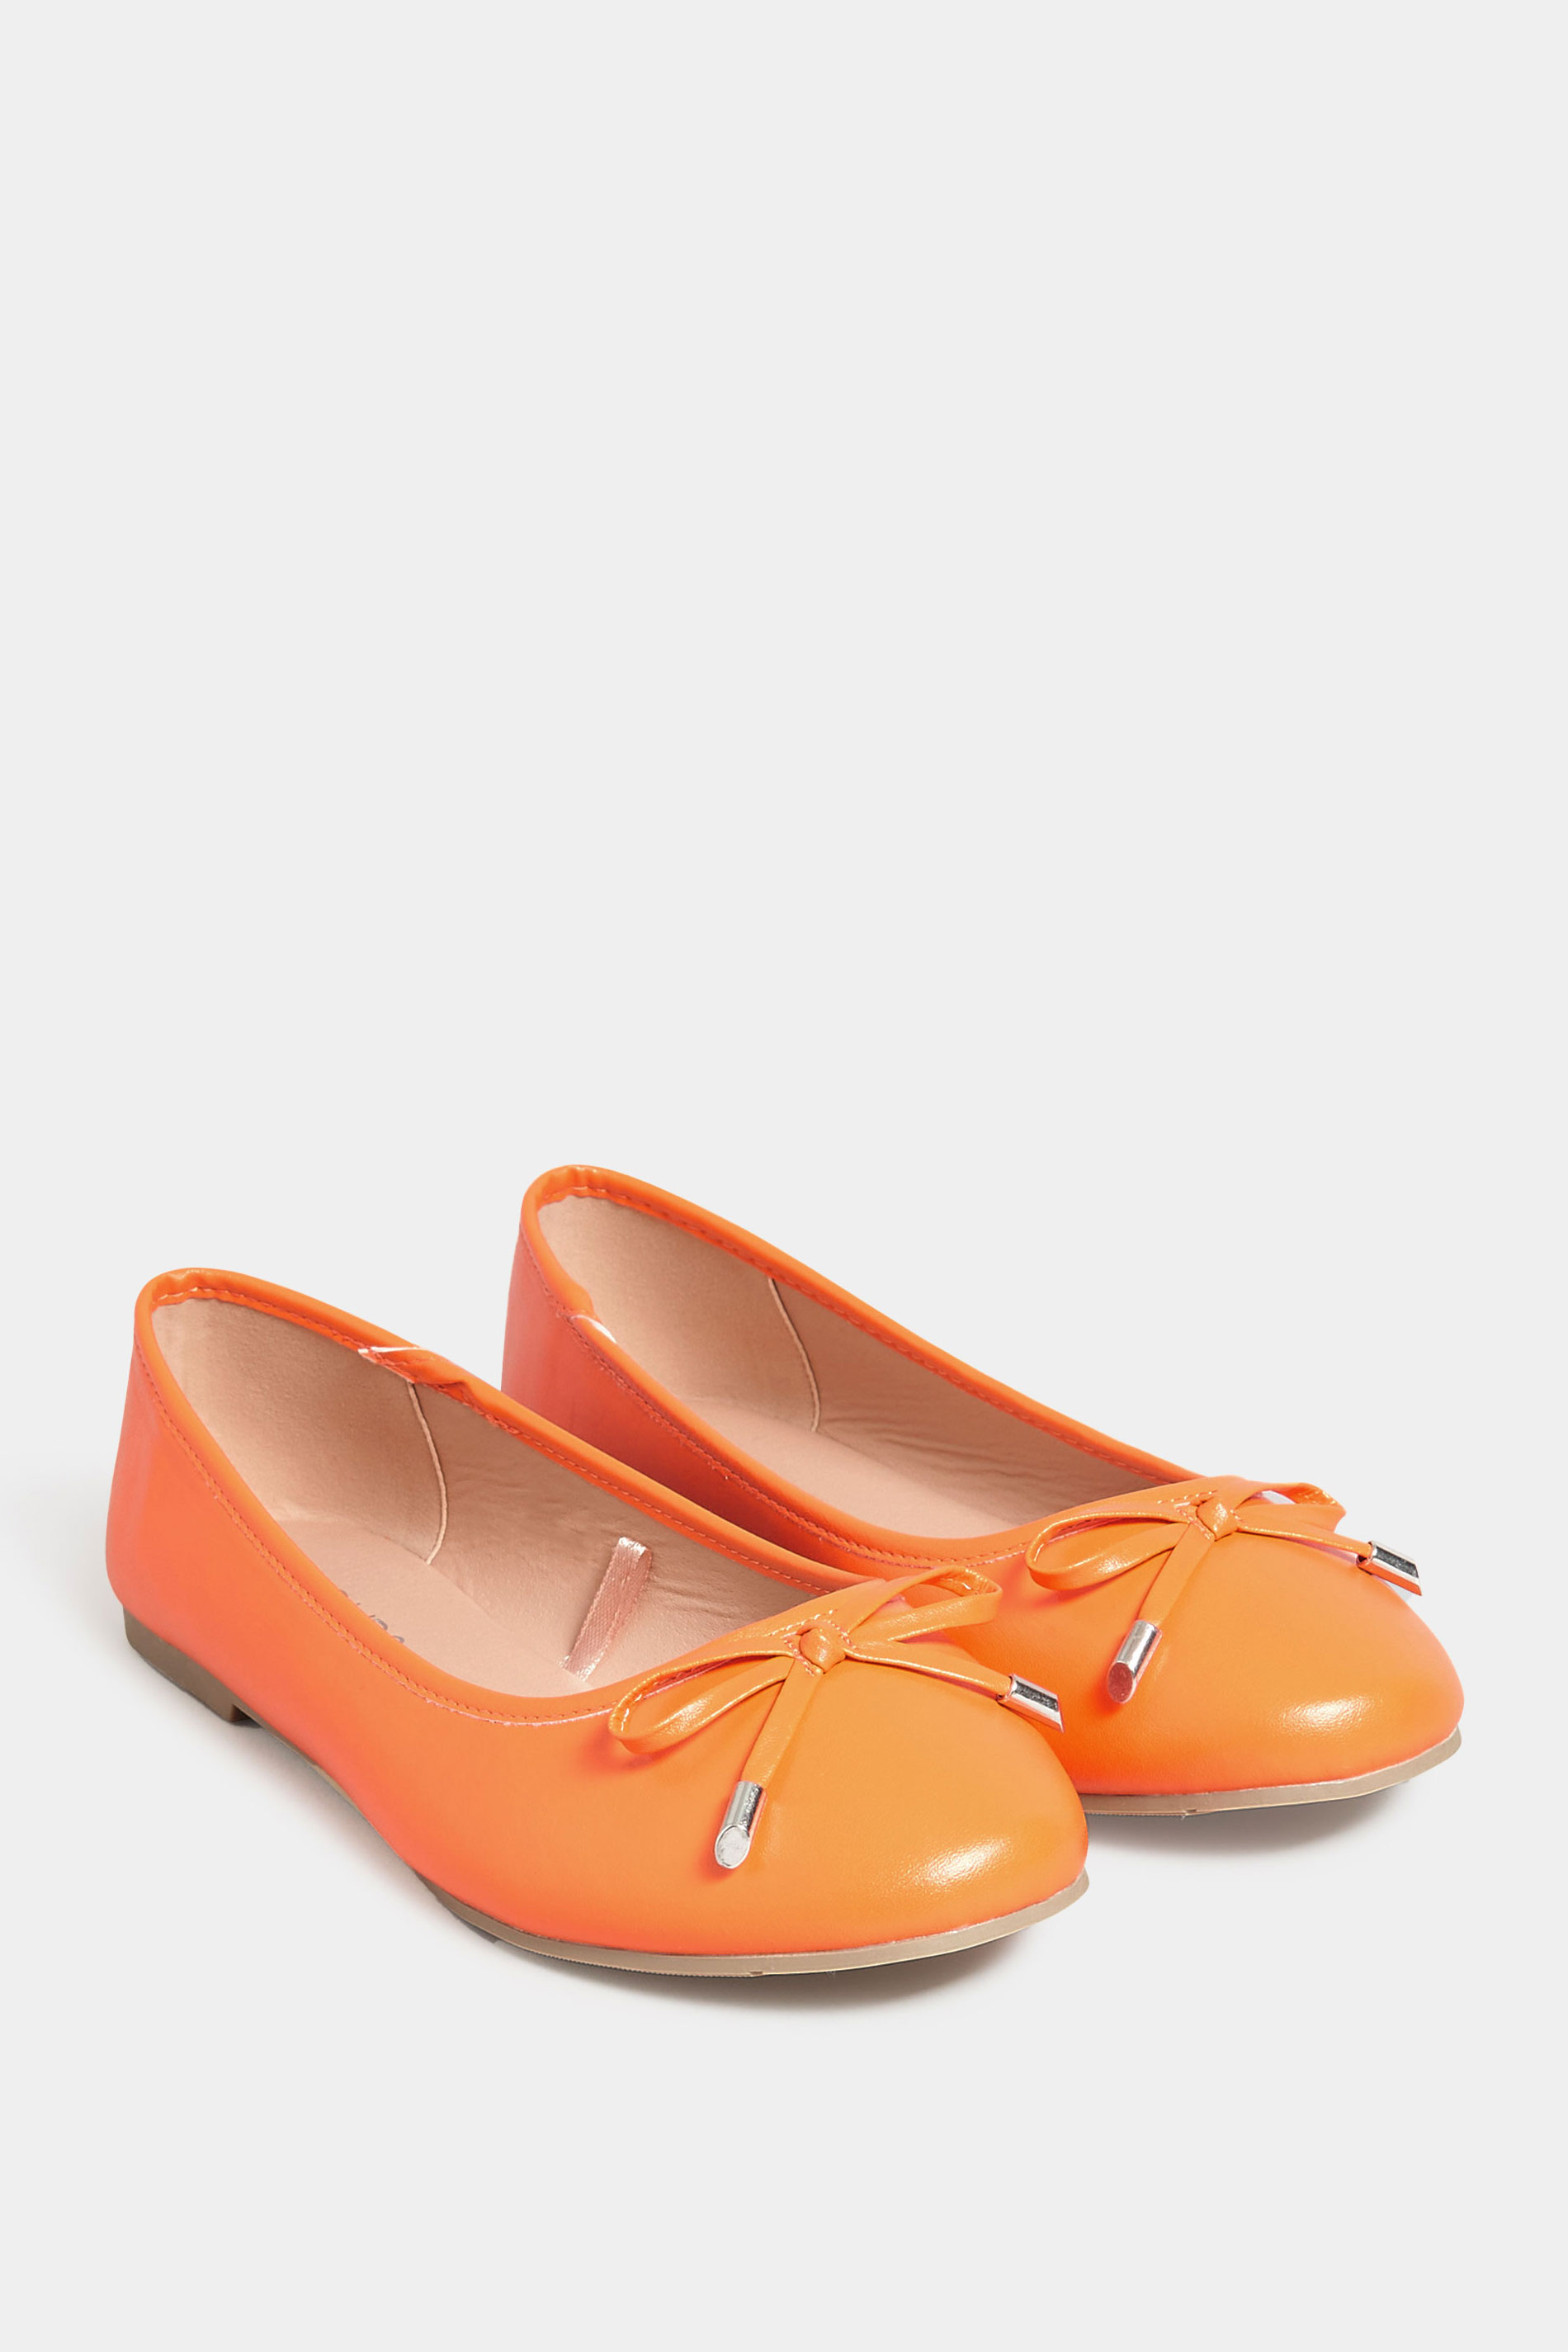 Orange Ballerina Pumps In Wide E Fit & Extra Wide EEE Fit| Yours Clothing 2